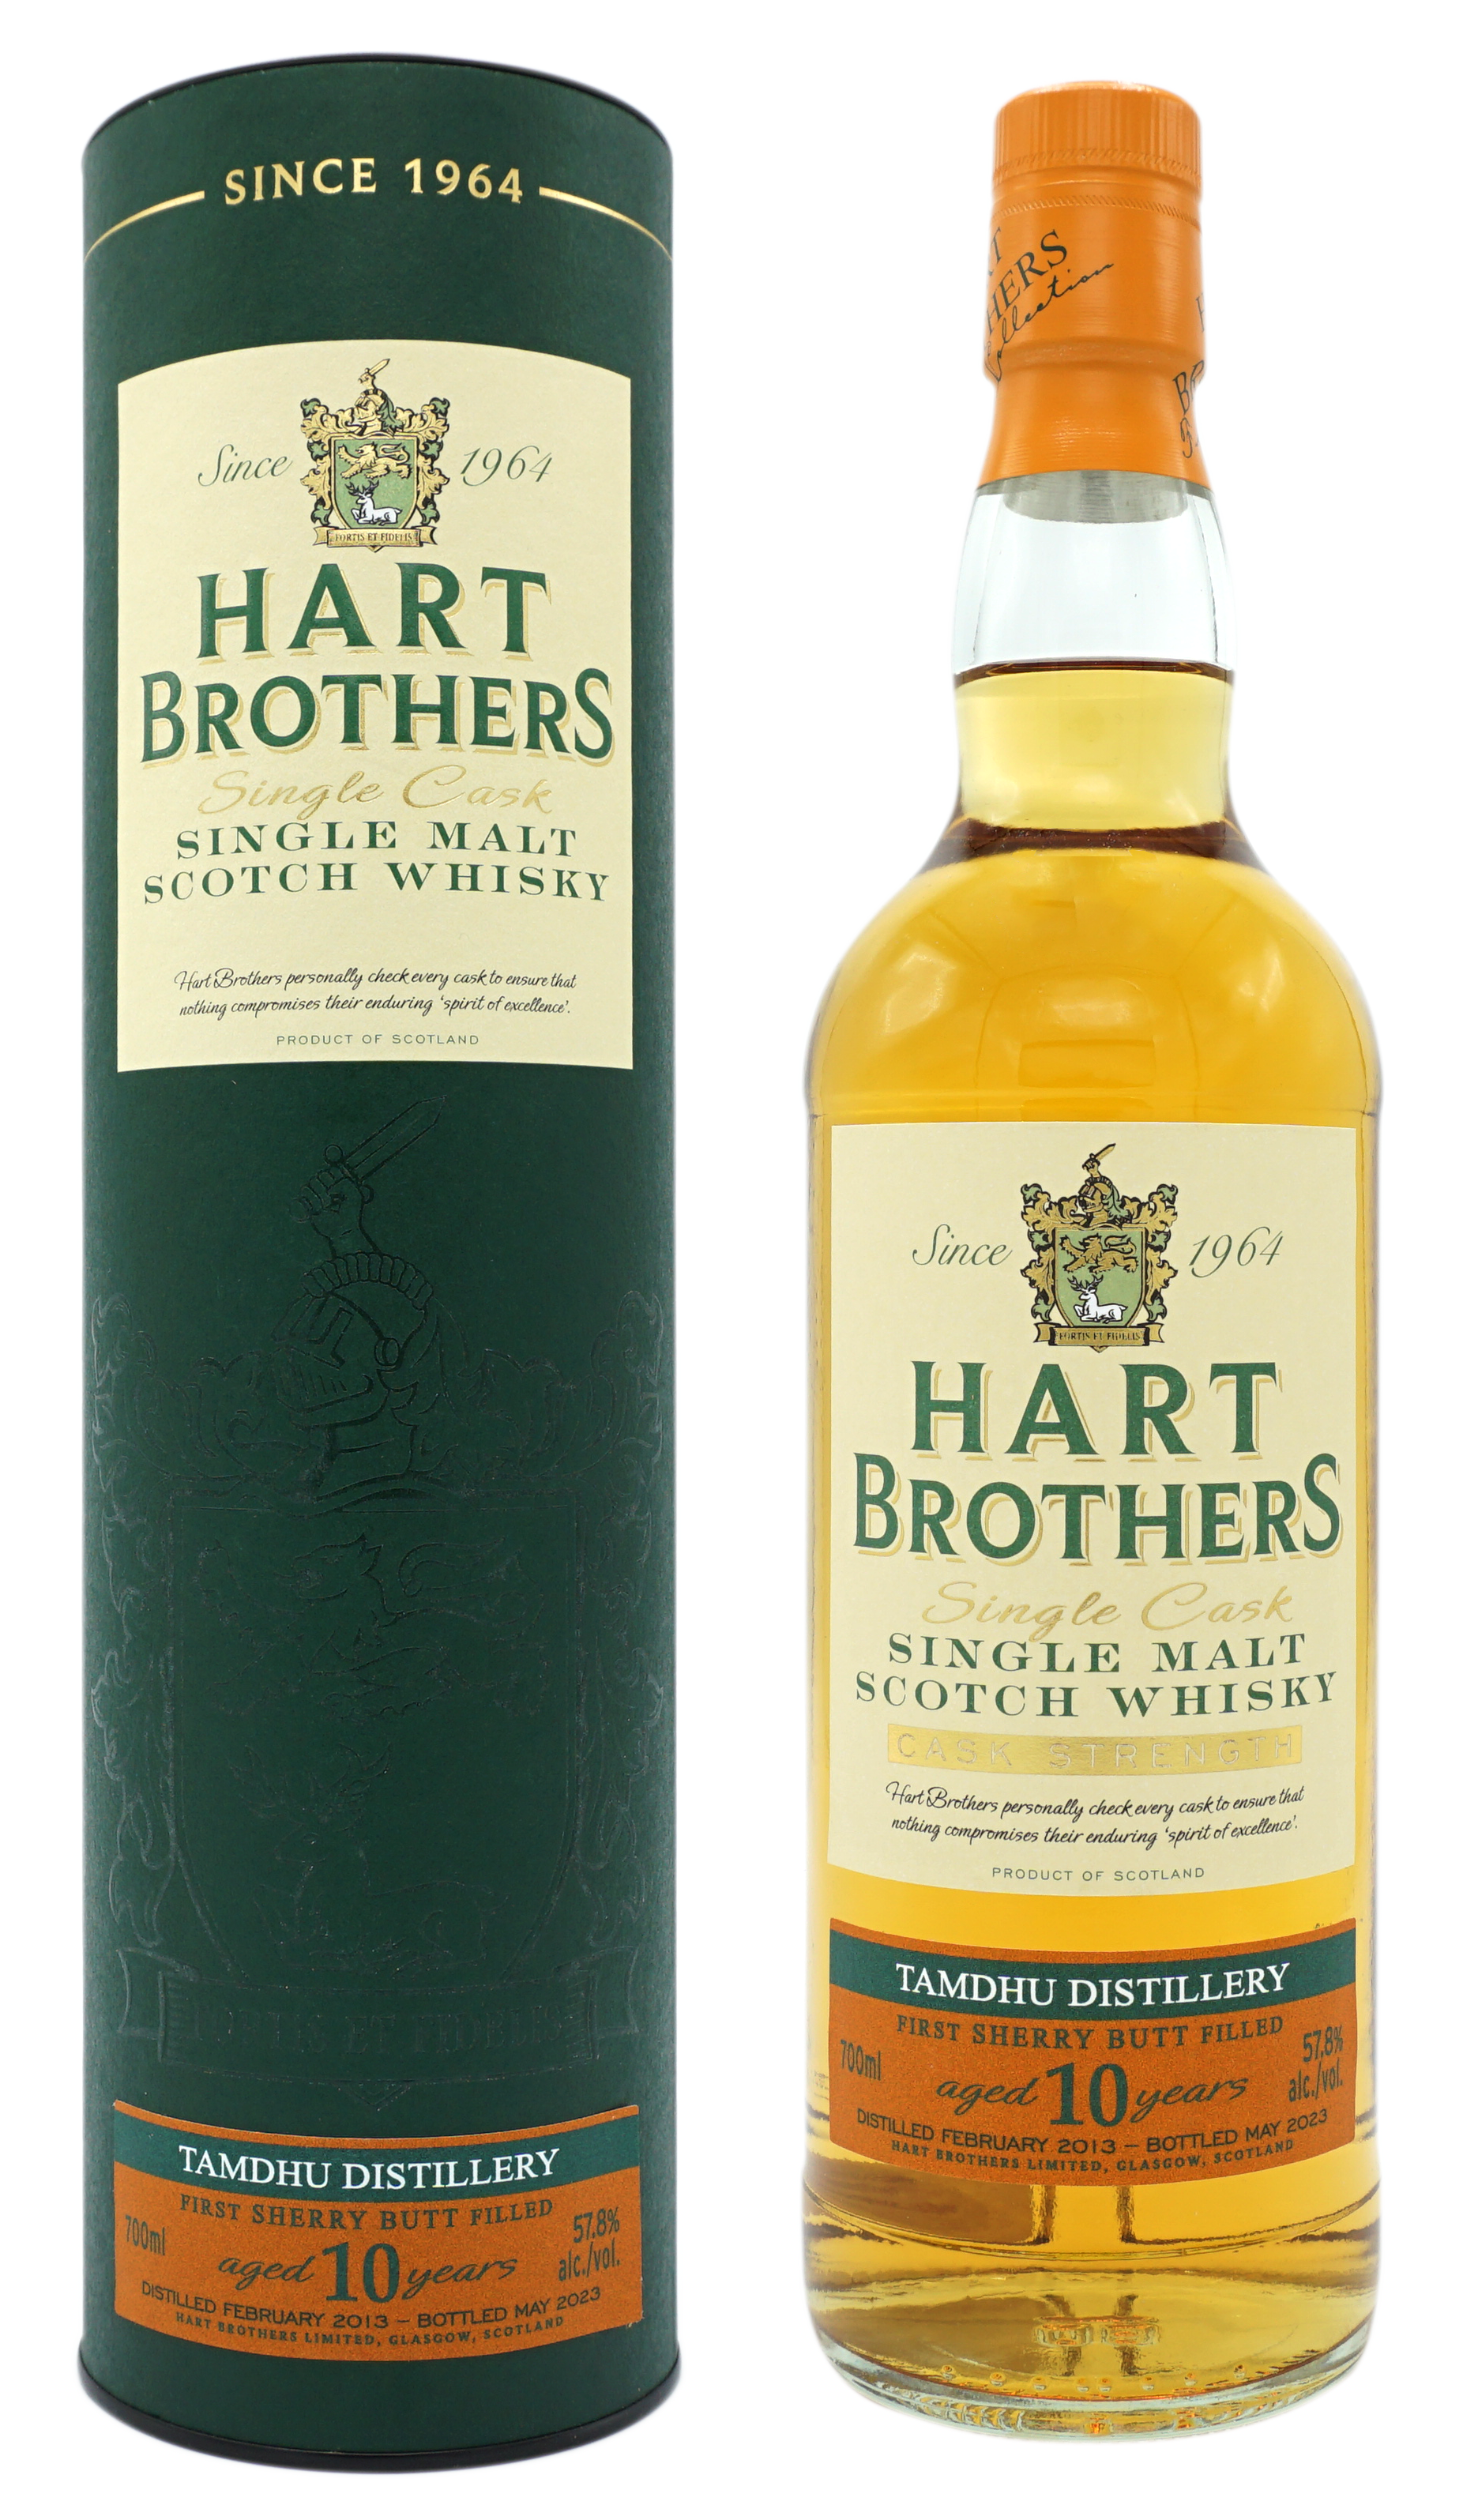 HartBrothers Thamdhu FirstSherryButtFilled 10y 57,8% Compleet